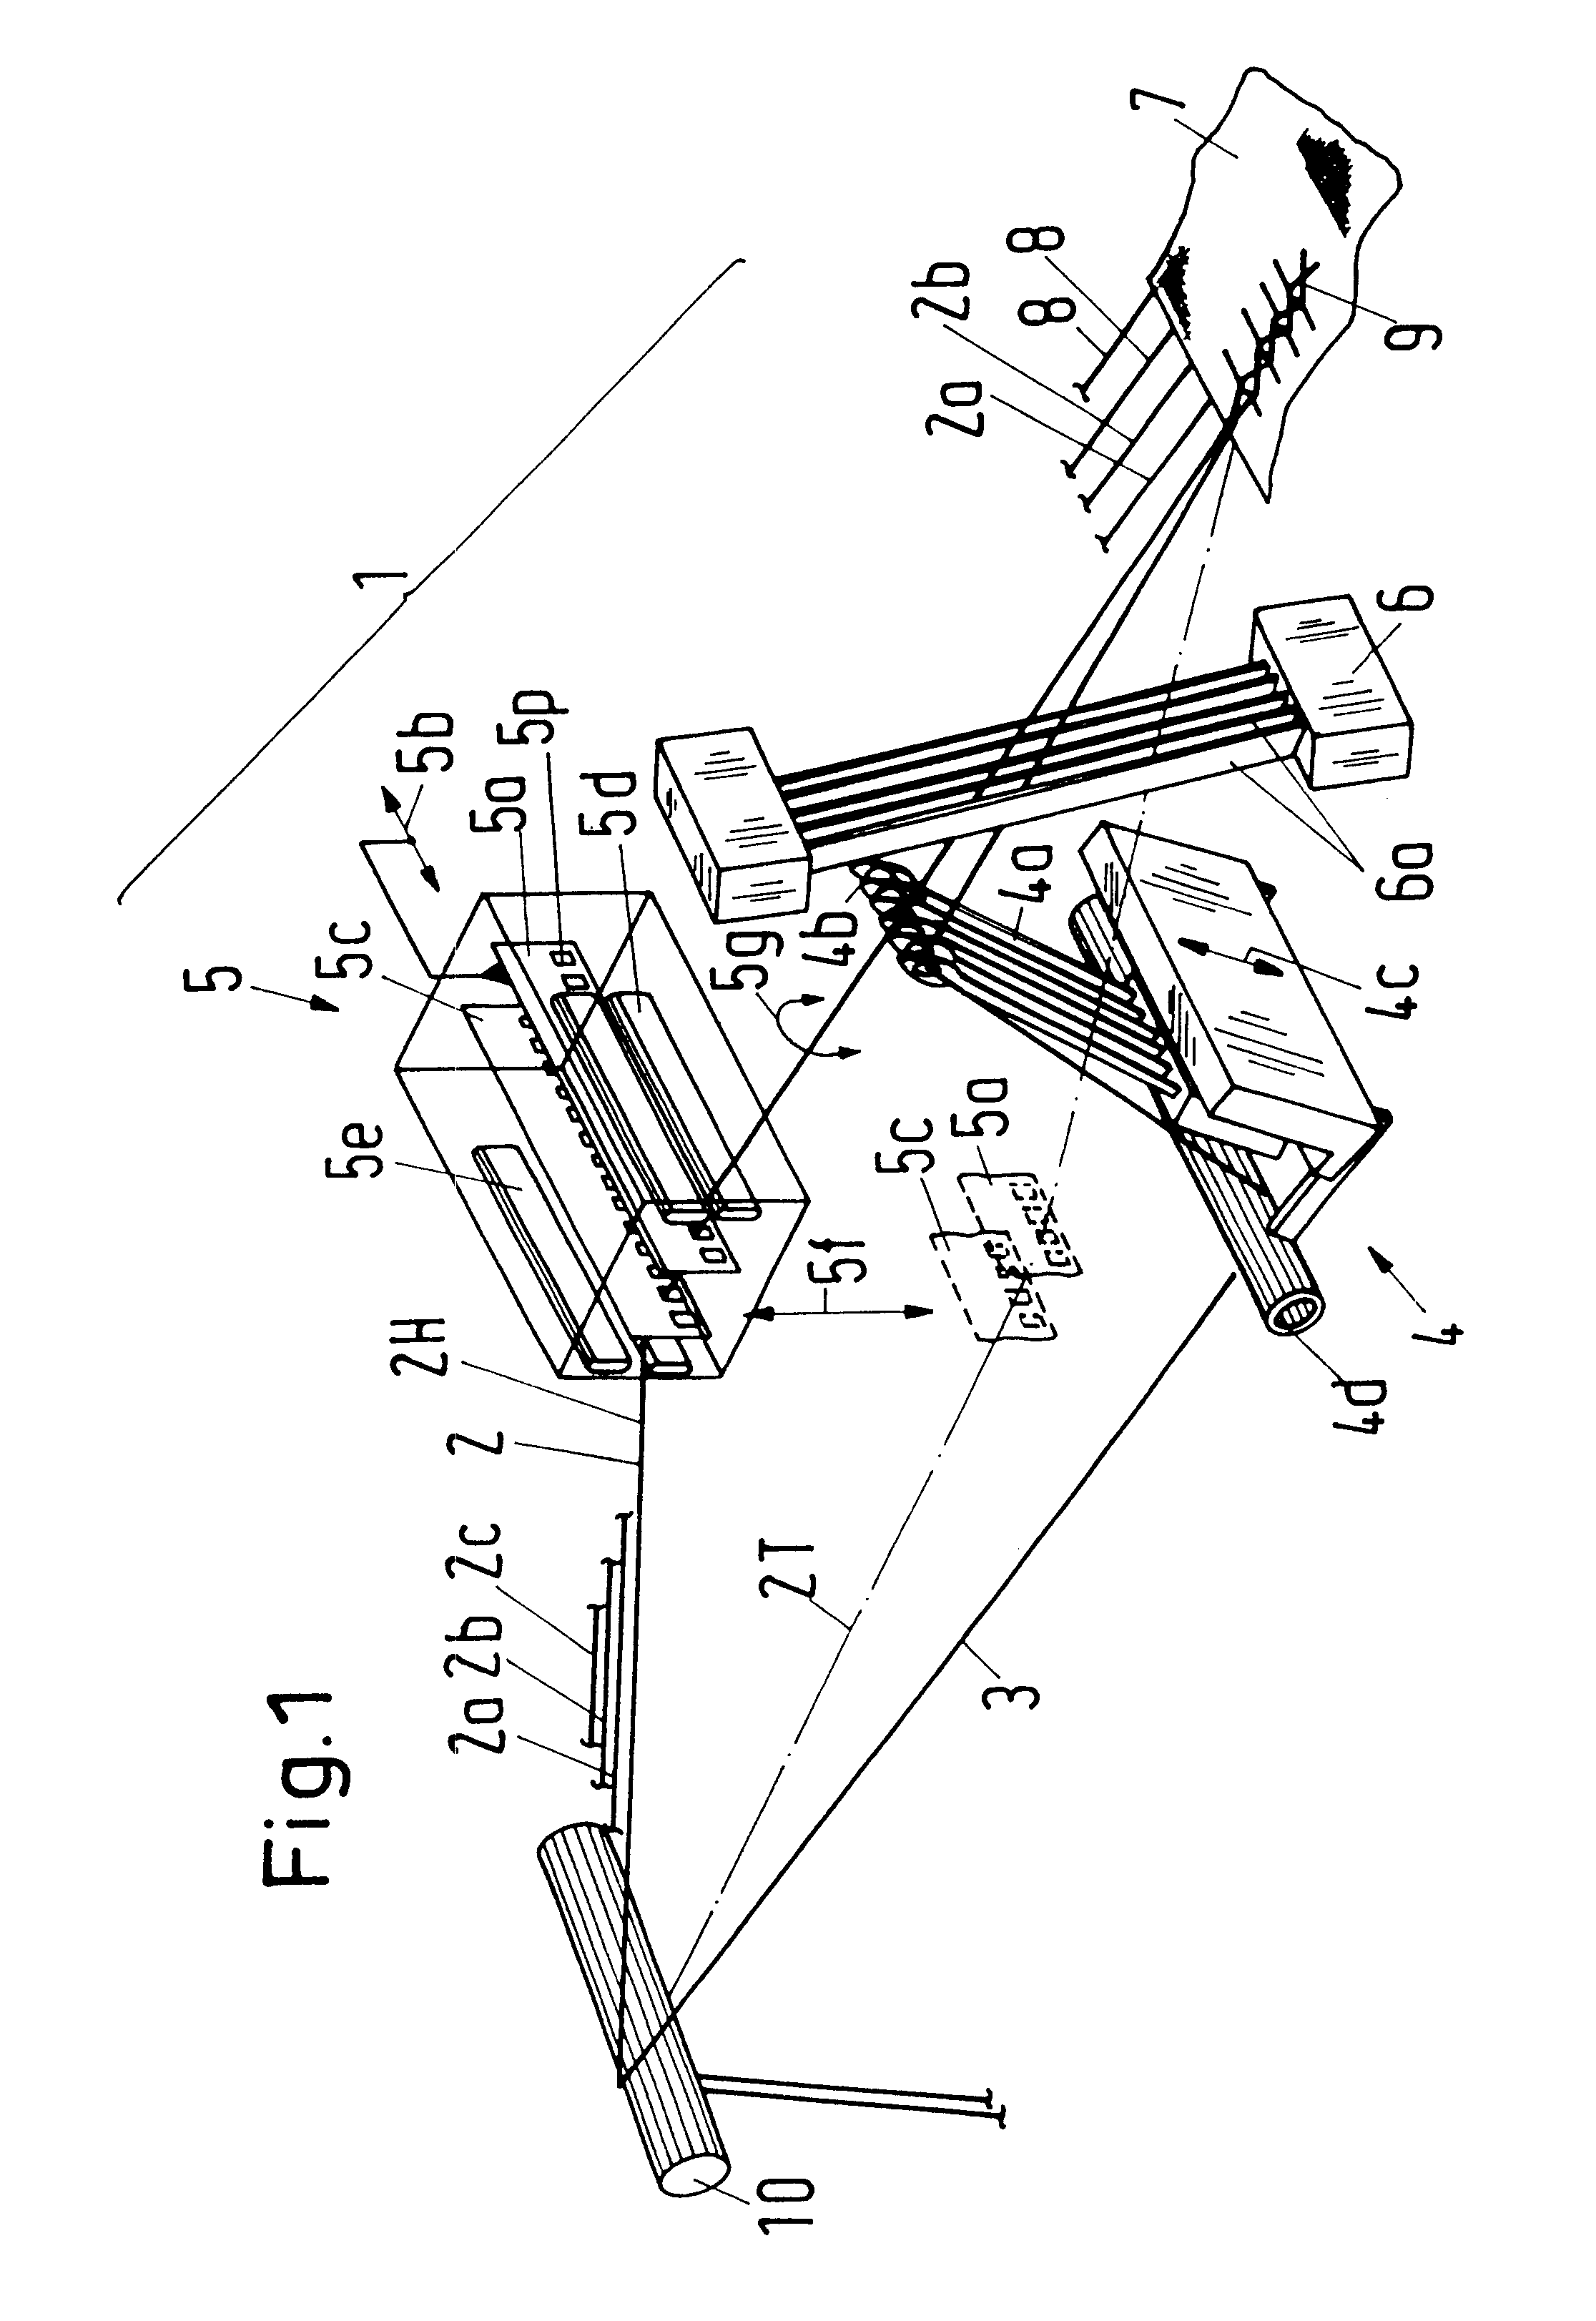 Apparatus for forming a leno weave